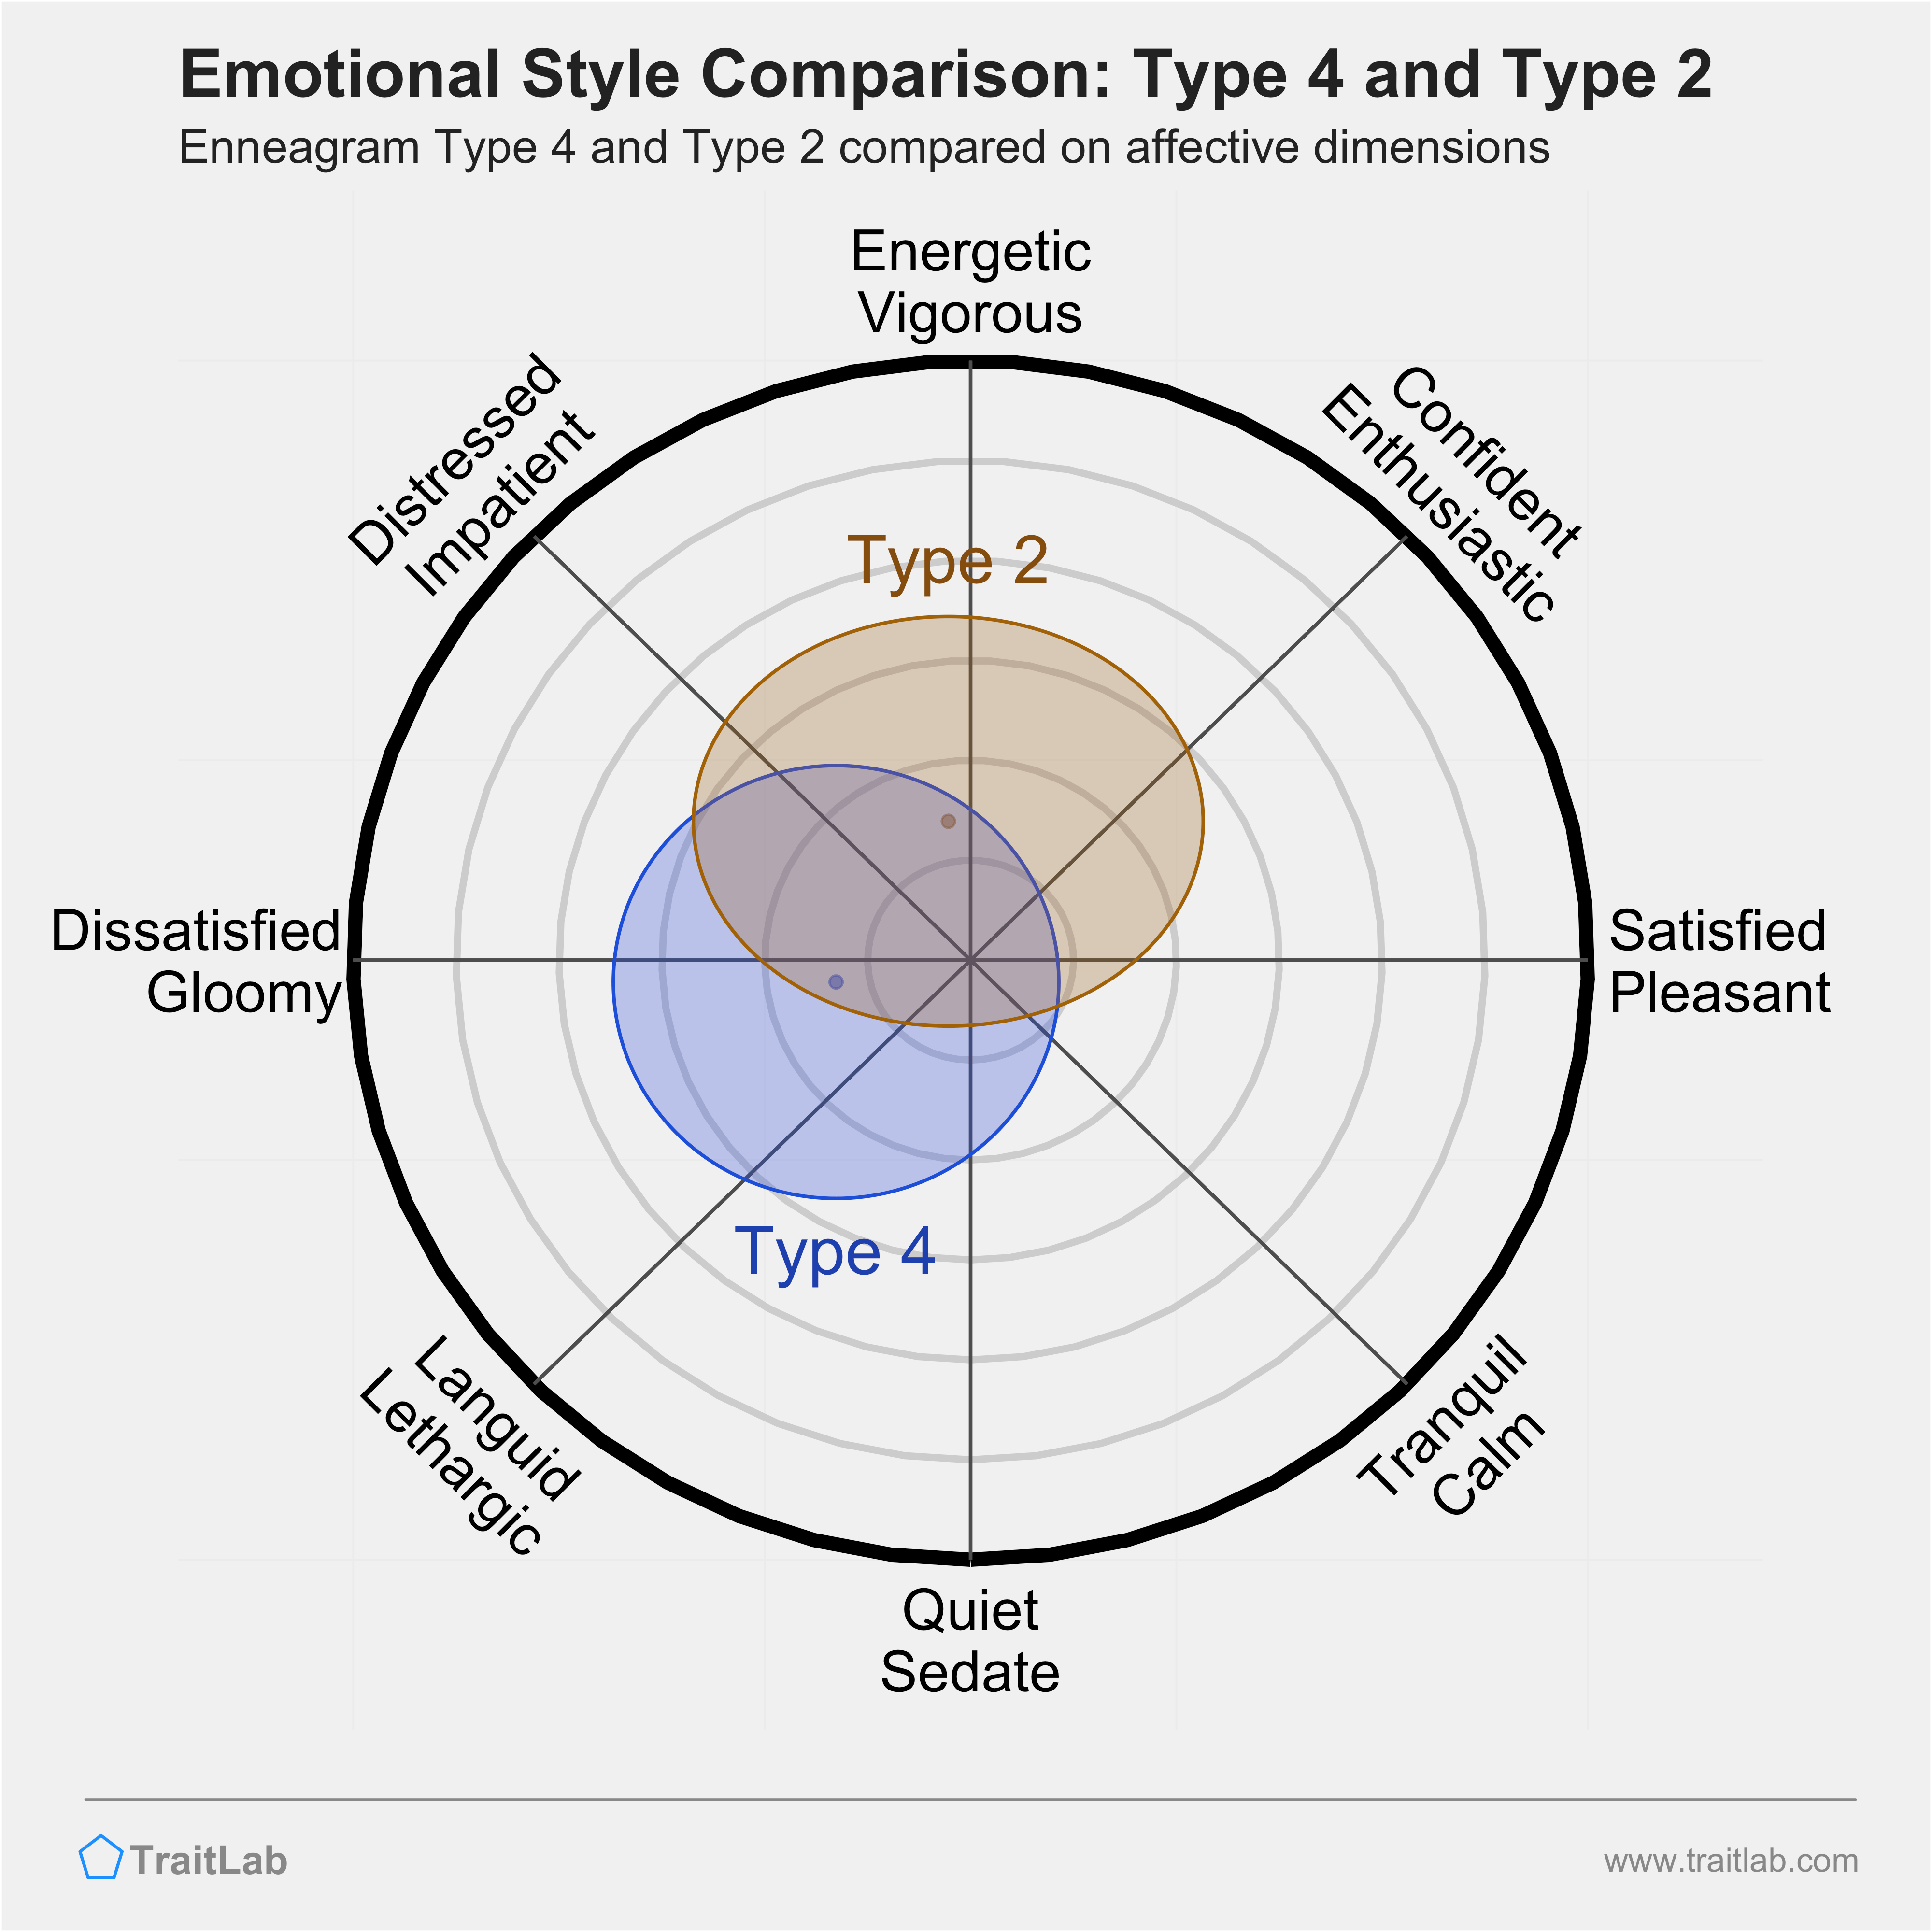 Type 4 and Type 2 comparison across emotional (affective) dimensions